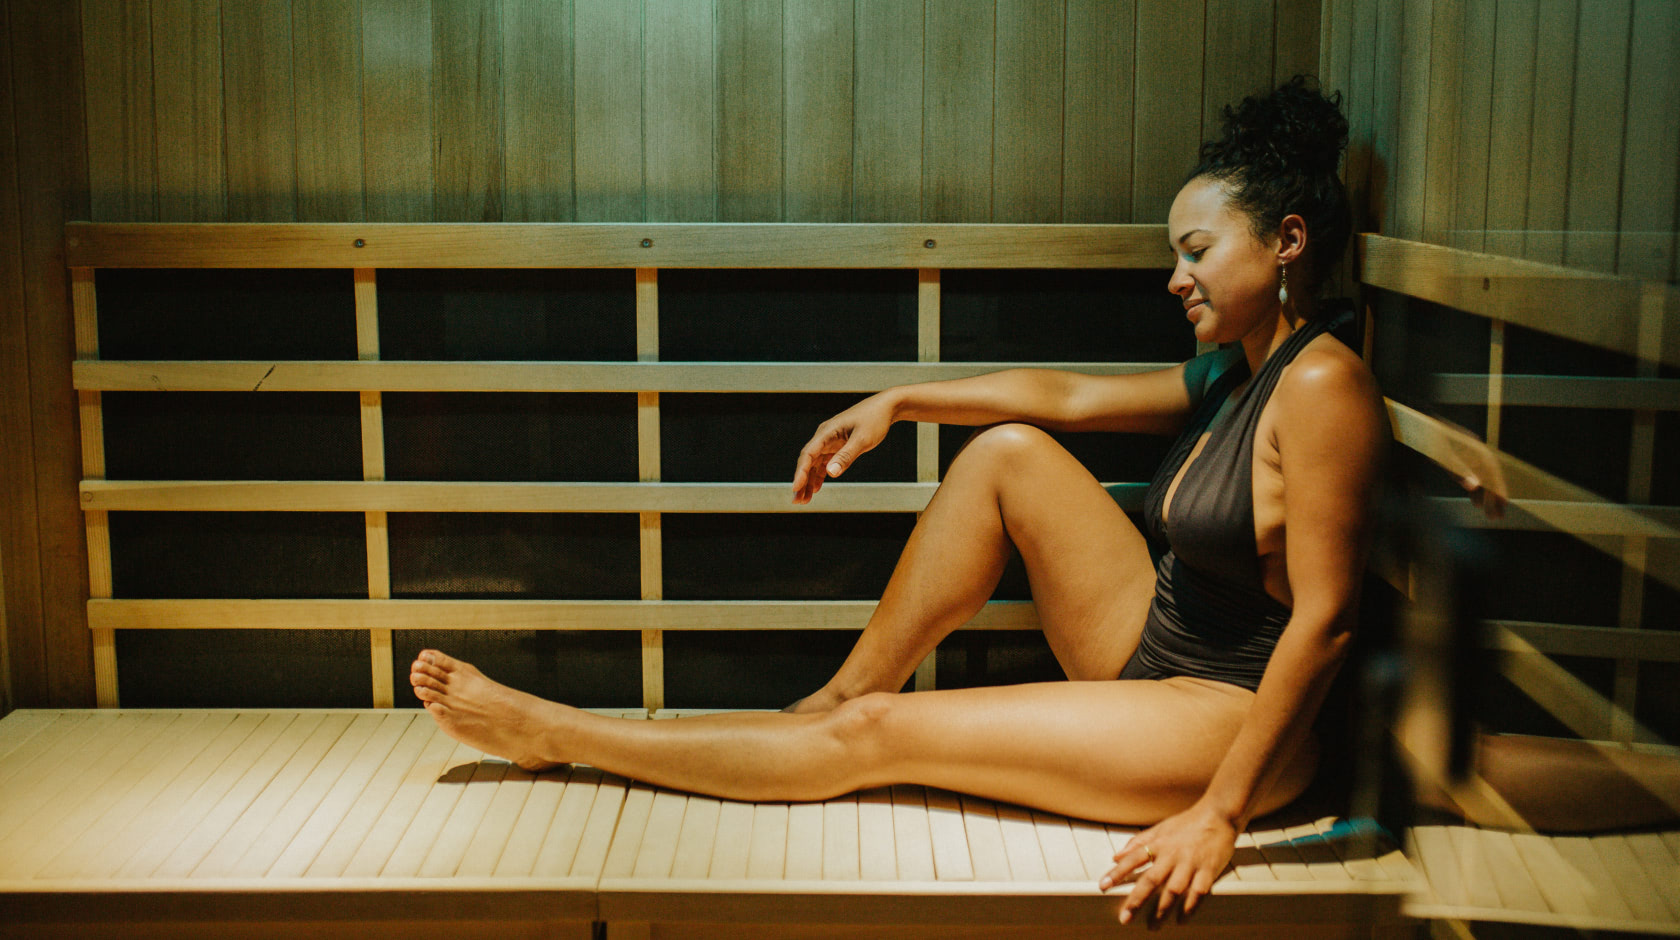 Woman sitting in an infrared sauna with green light